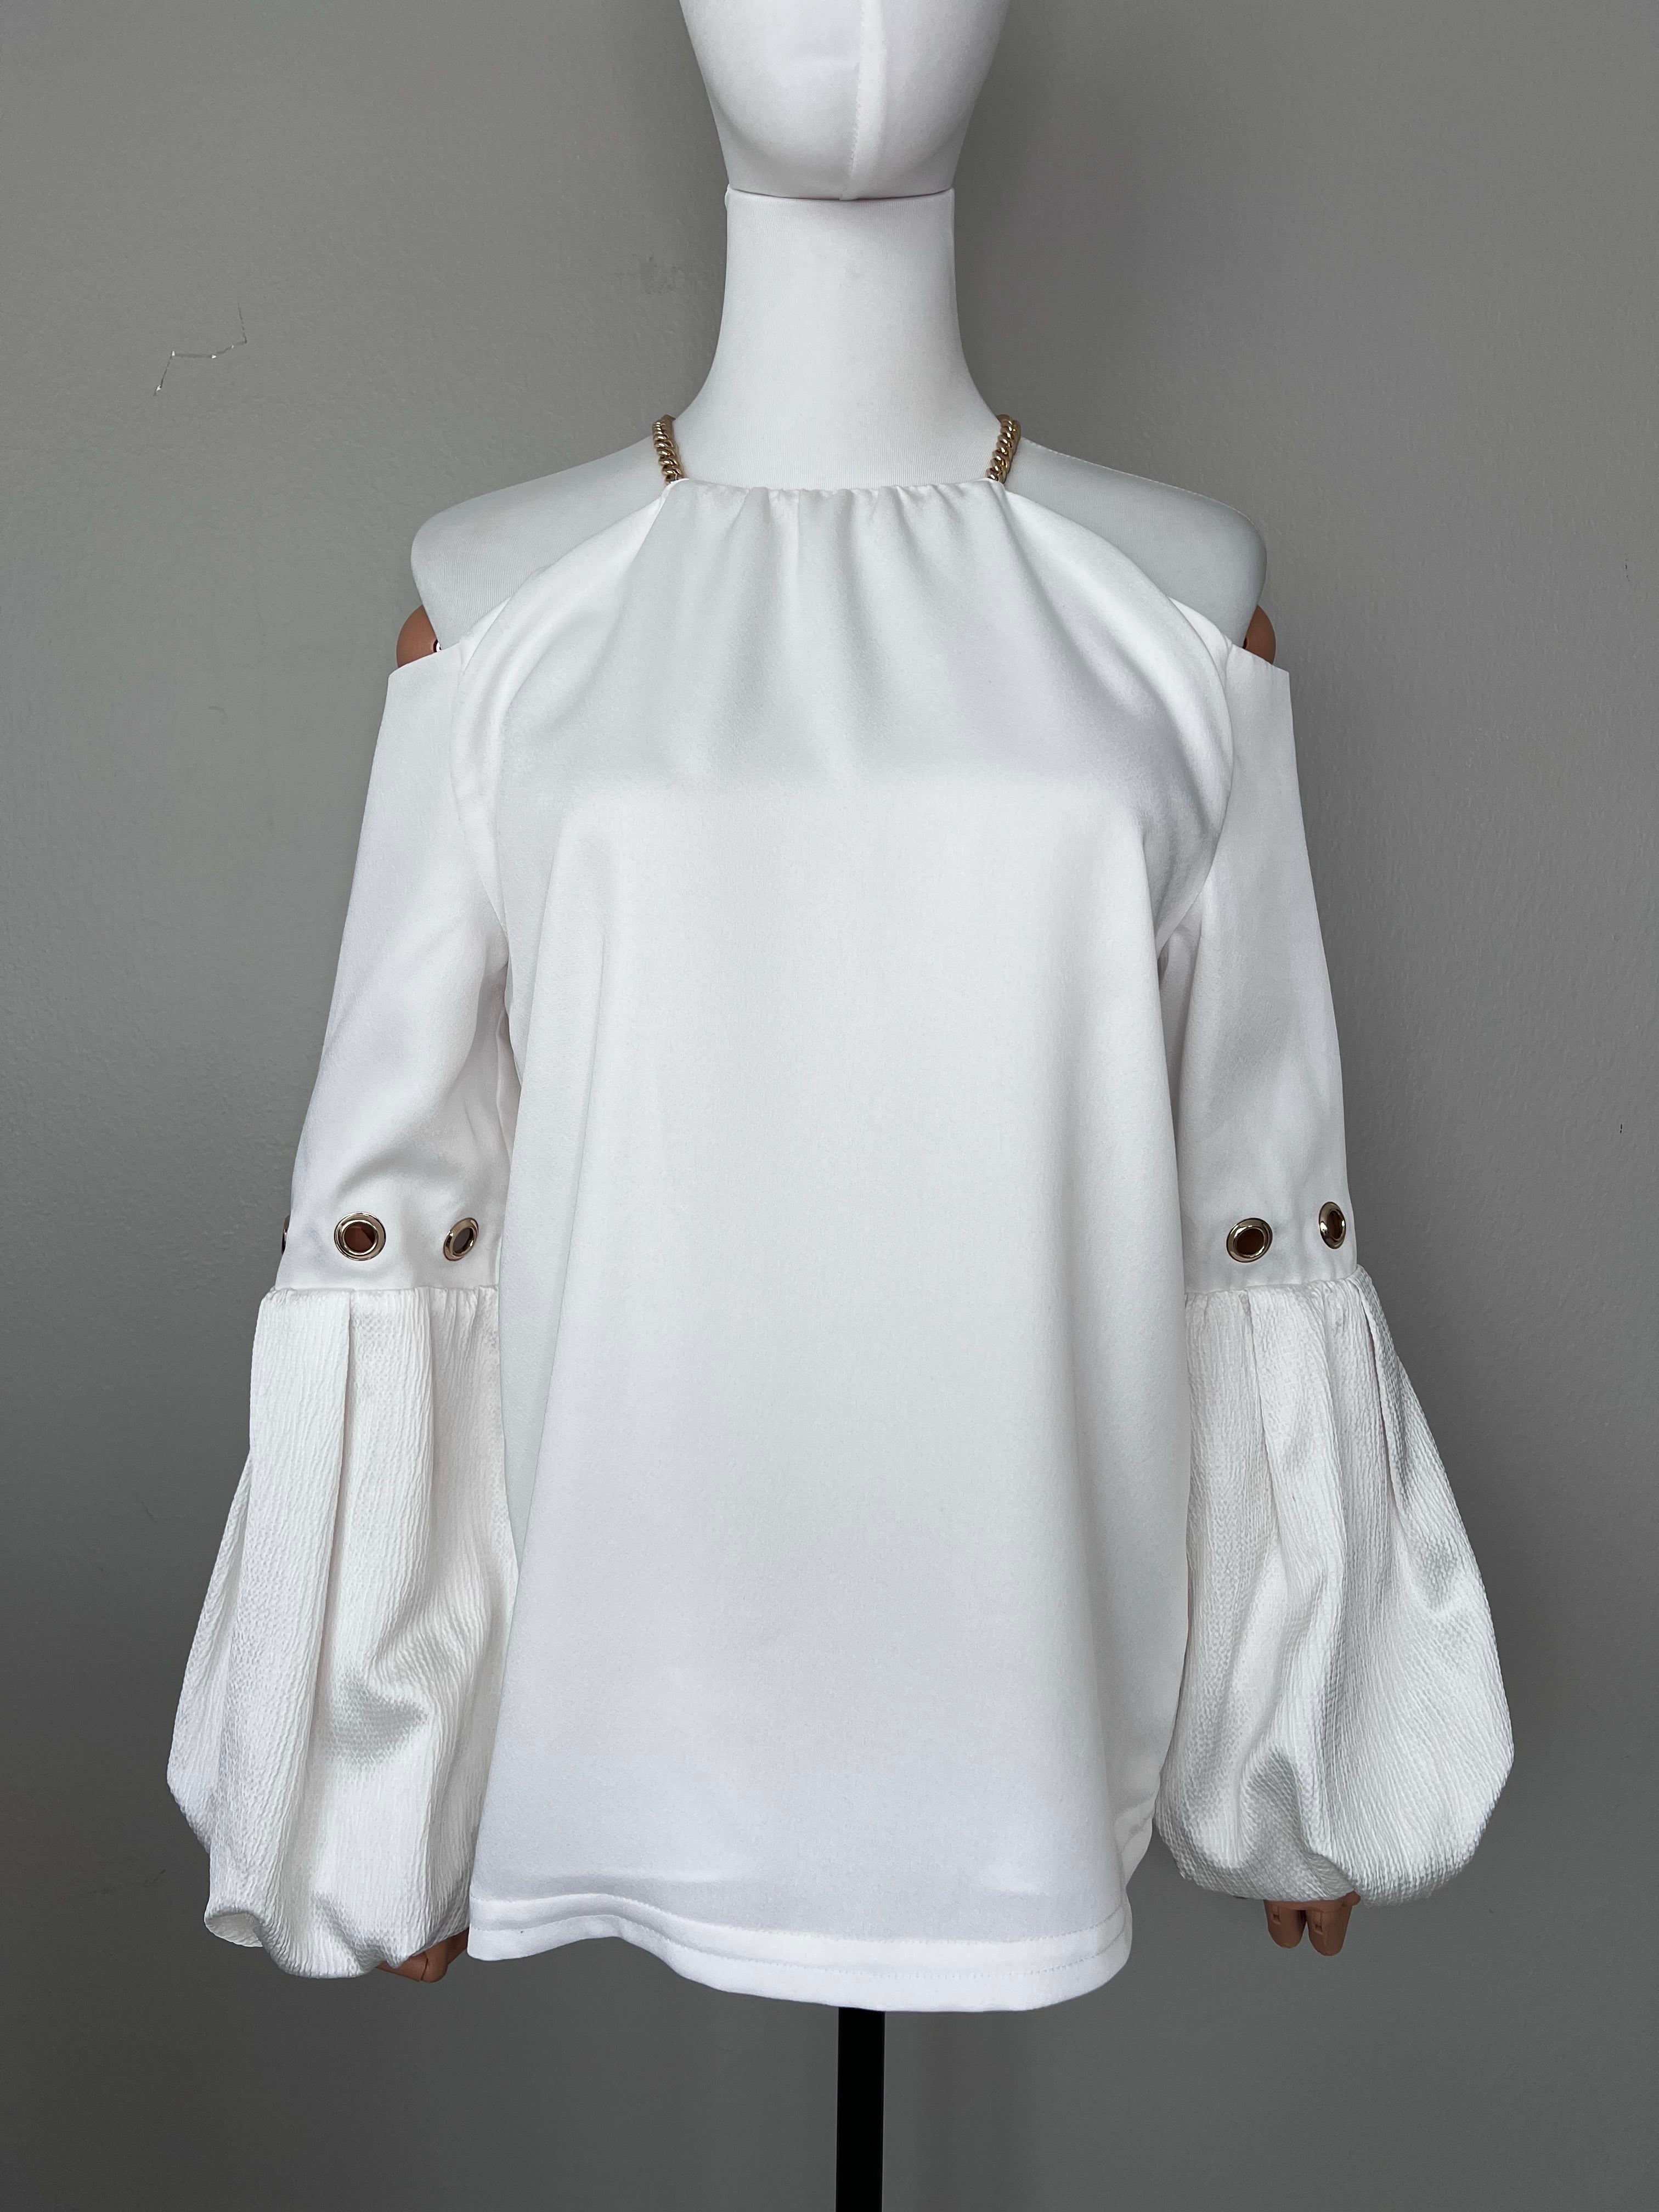 White off-shoulder top with gold chain strap and overflow sleeves with design - SELF-PORTRAIT